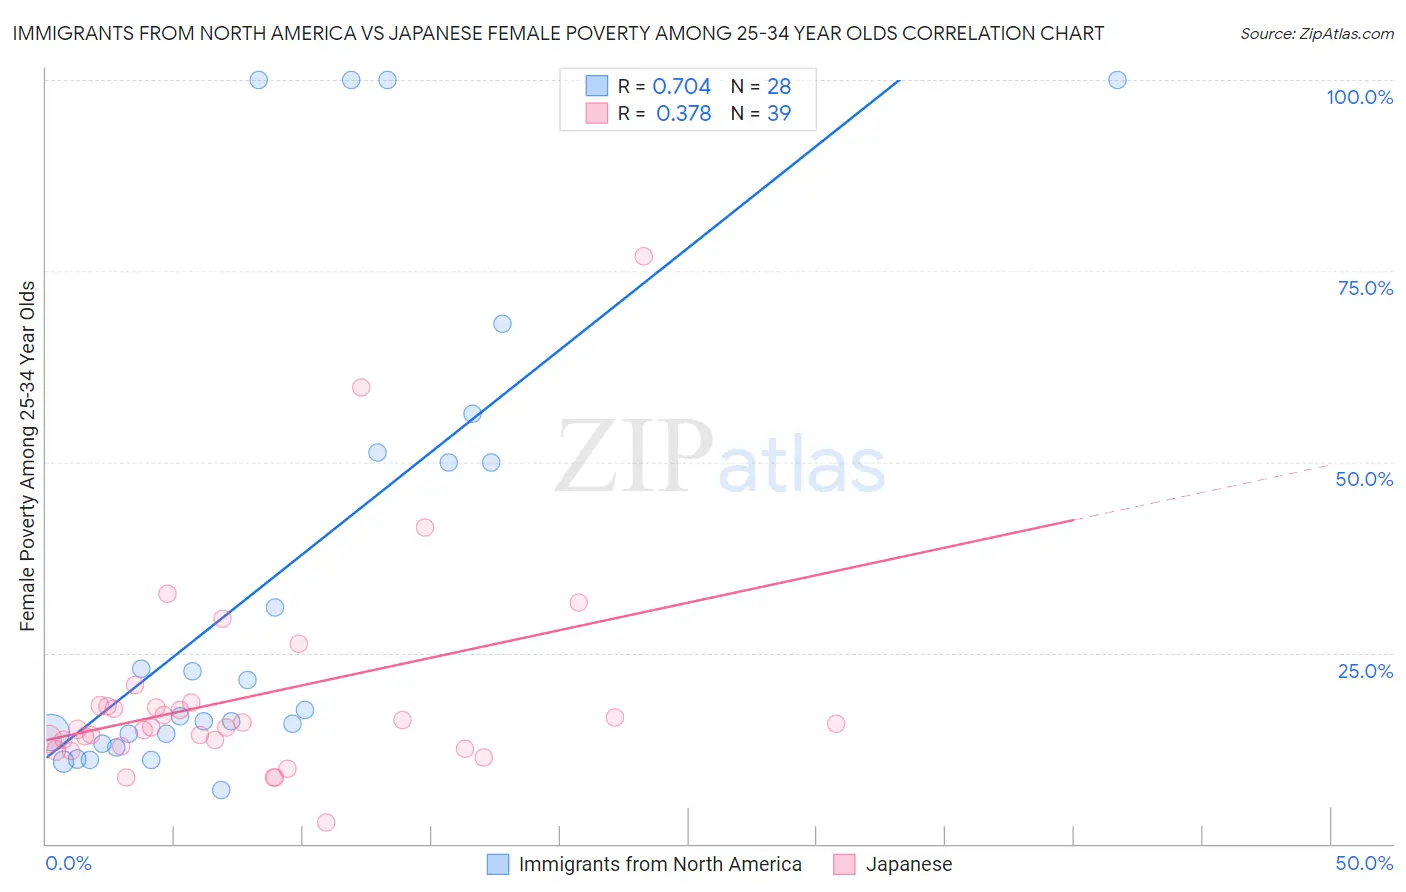 Immigrants from North America vs Japanese Female Poverty Among 25-34 Year Olds